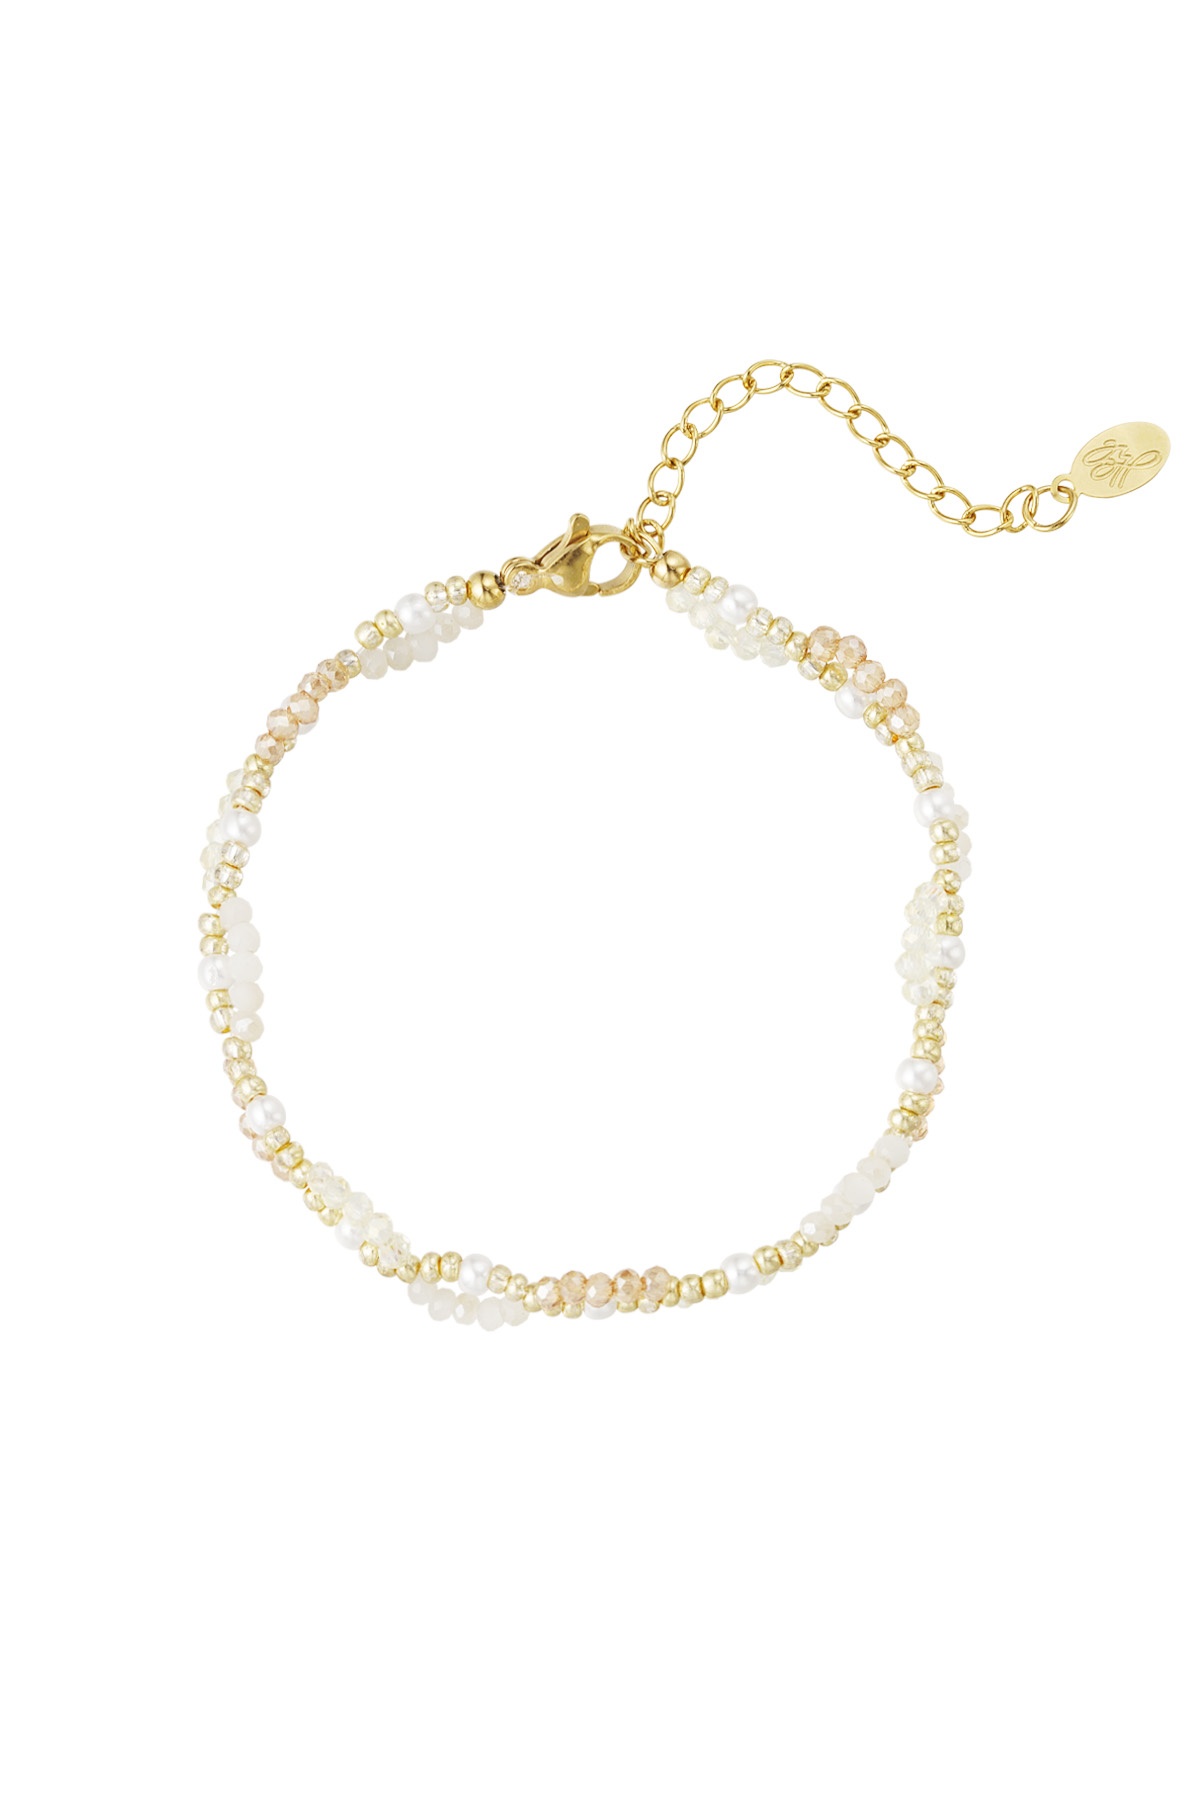 Amrband printemps must have - or blanc